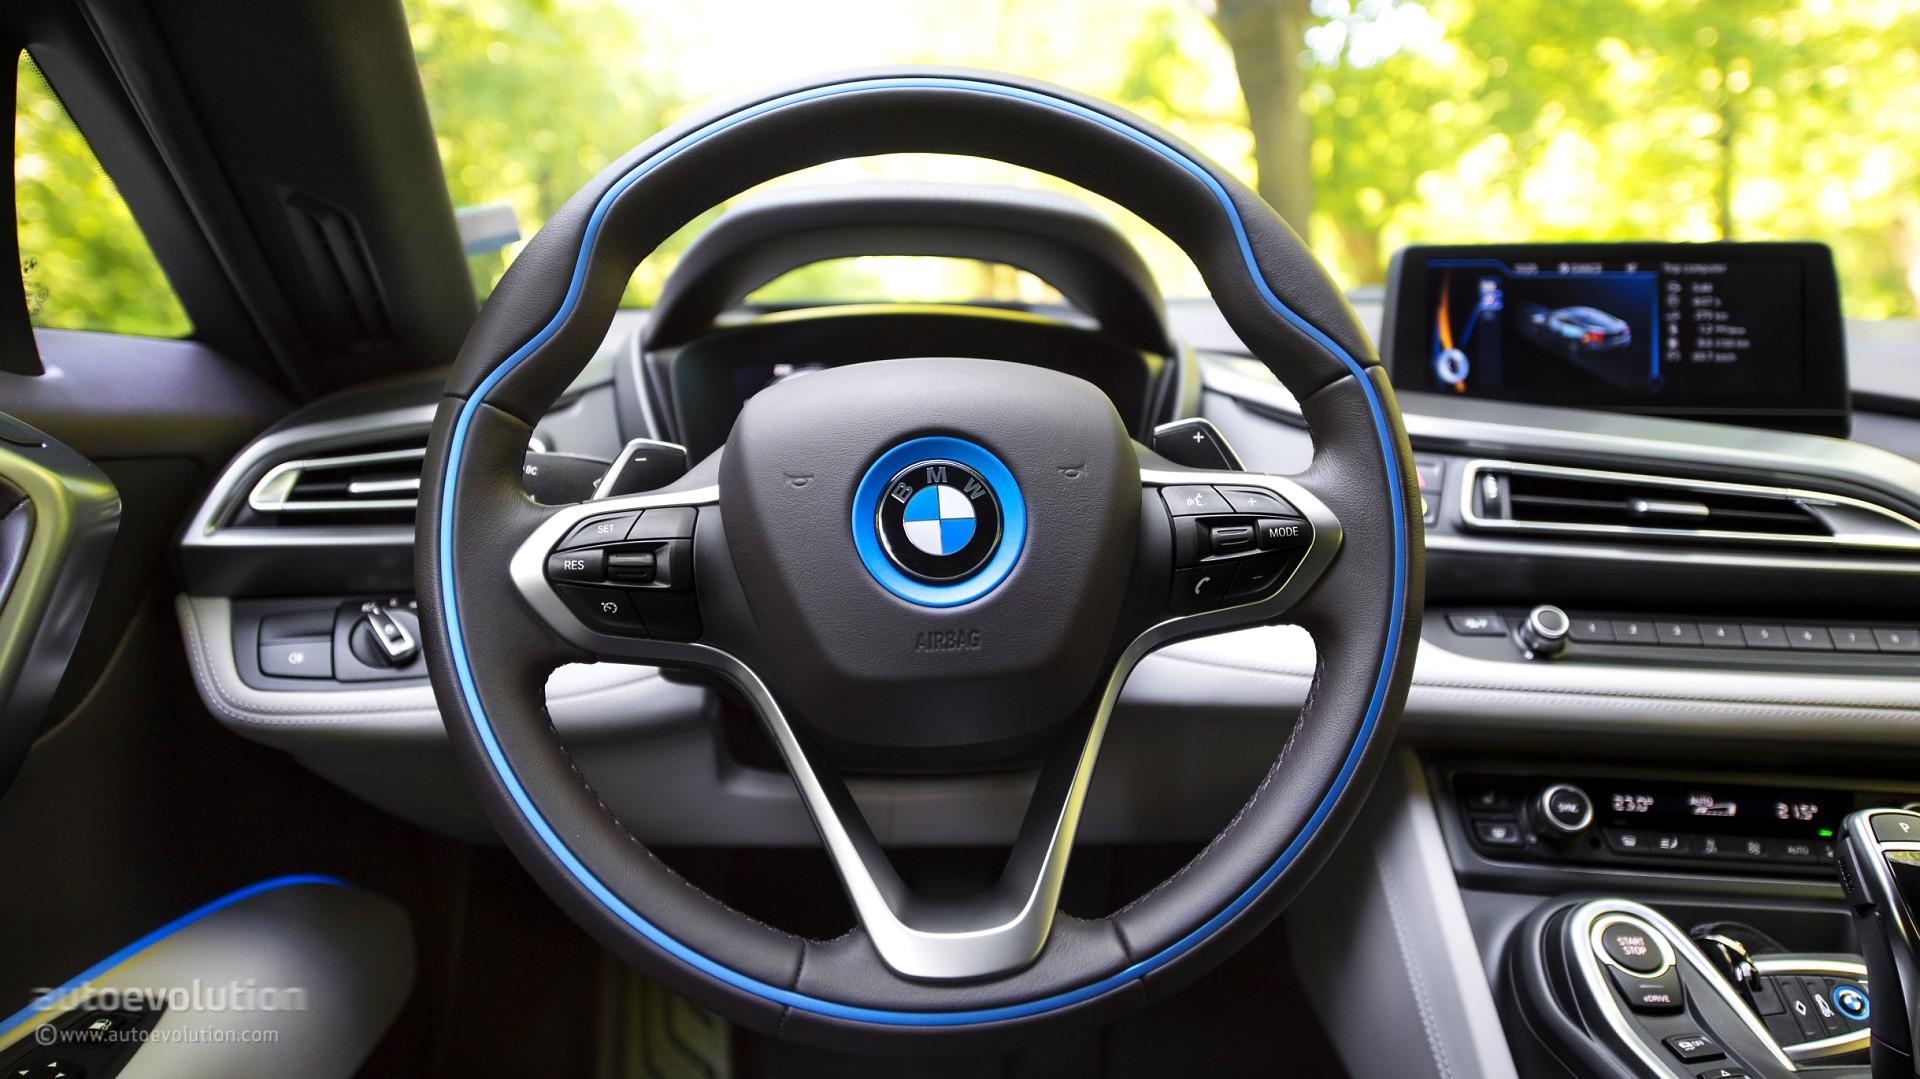 How To Bmw I8 The HD Wallpaper Guide Autoevolution